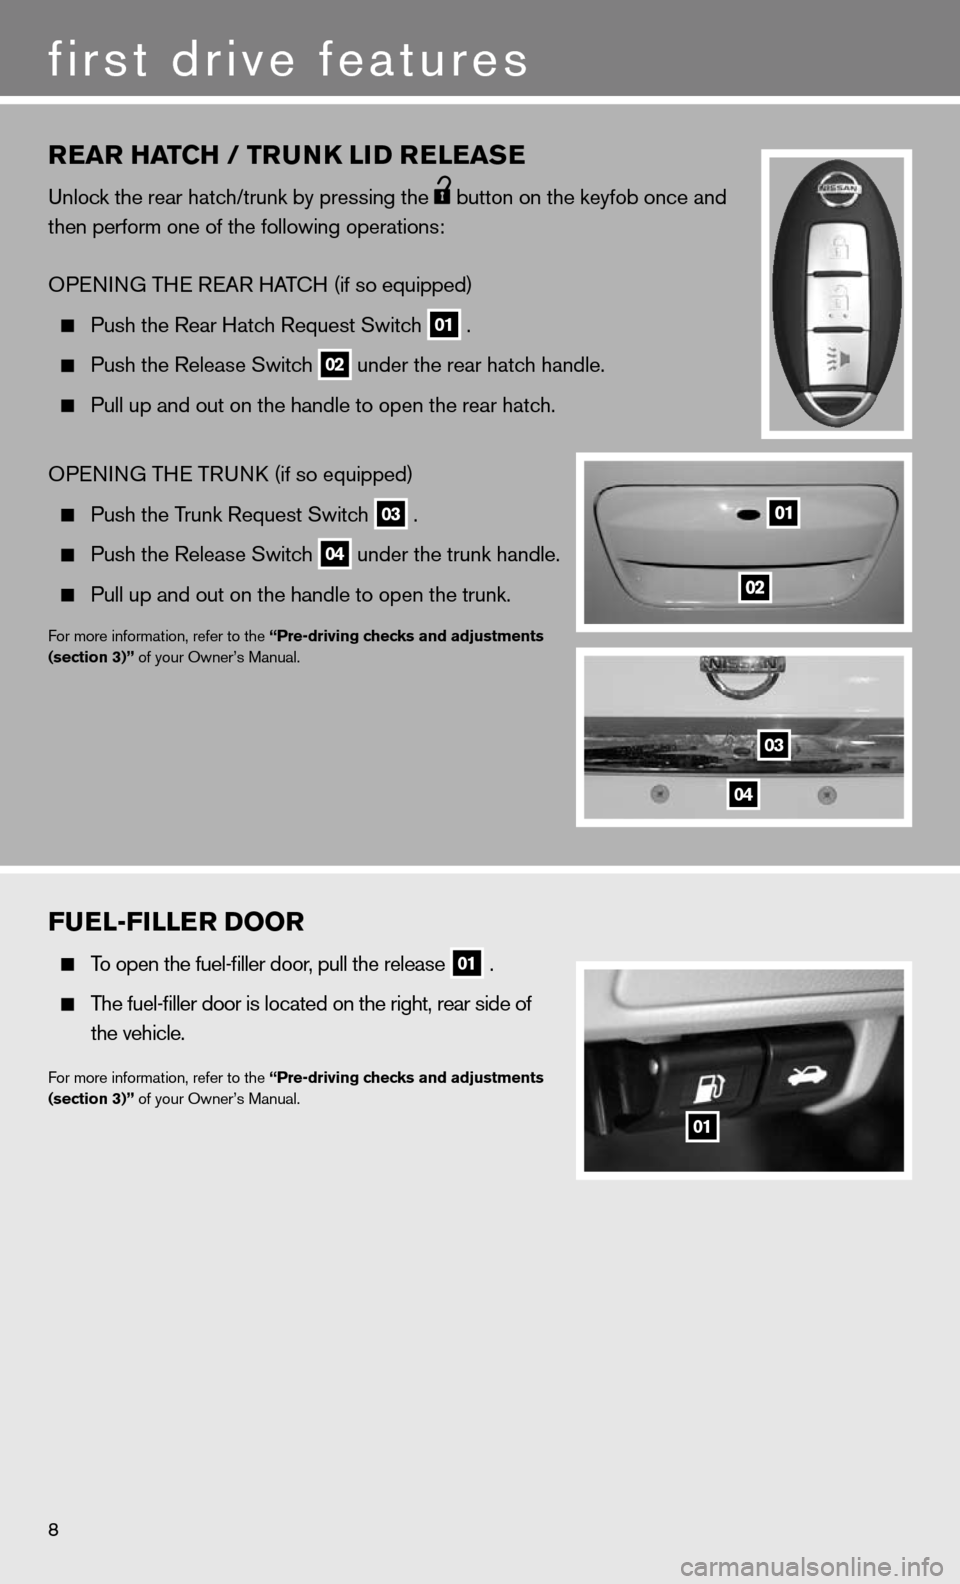 NISSAN VERSA HATCHBACK 2011 1.G Quick Reference Guide rear HaTcH / Tru NK liD releaS e
unlock the rear hatch/trunk by pressing the  button on the keyfob once and 
then perform one of the following operations:  
OP enin G THe ReAR HAT cH (if so equipped) 